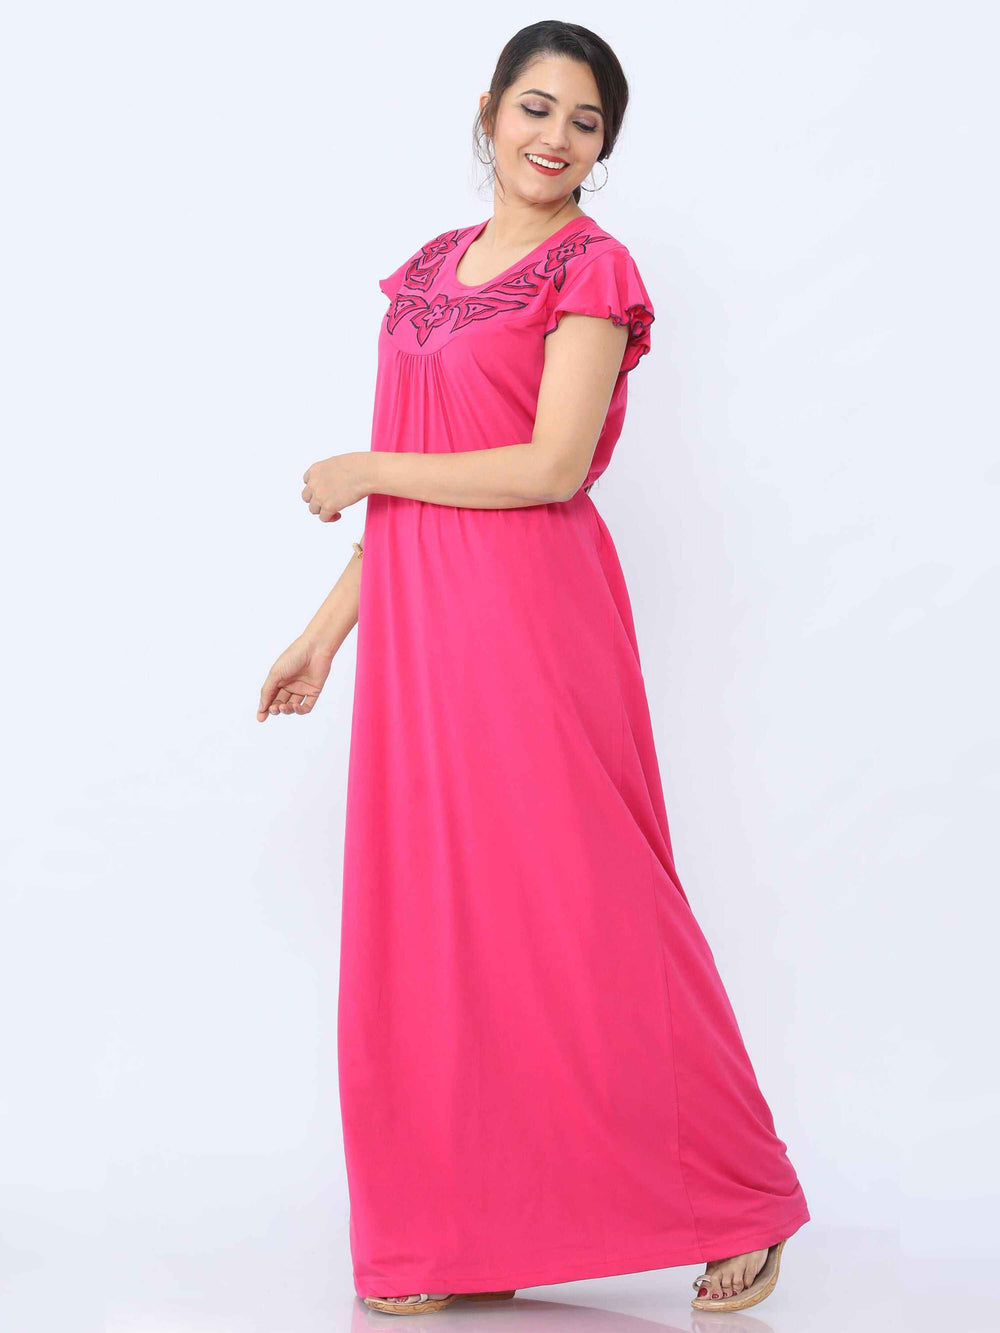  Cotton Blend Nighty  Buy Pink Hosiery Cotton Night Dress |Night Suits|Top & Shorts Set| 9shines label- 9shines label 